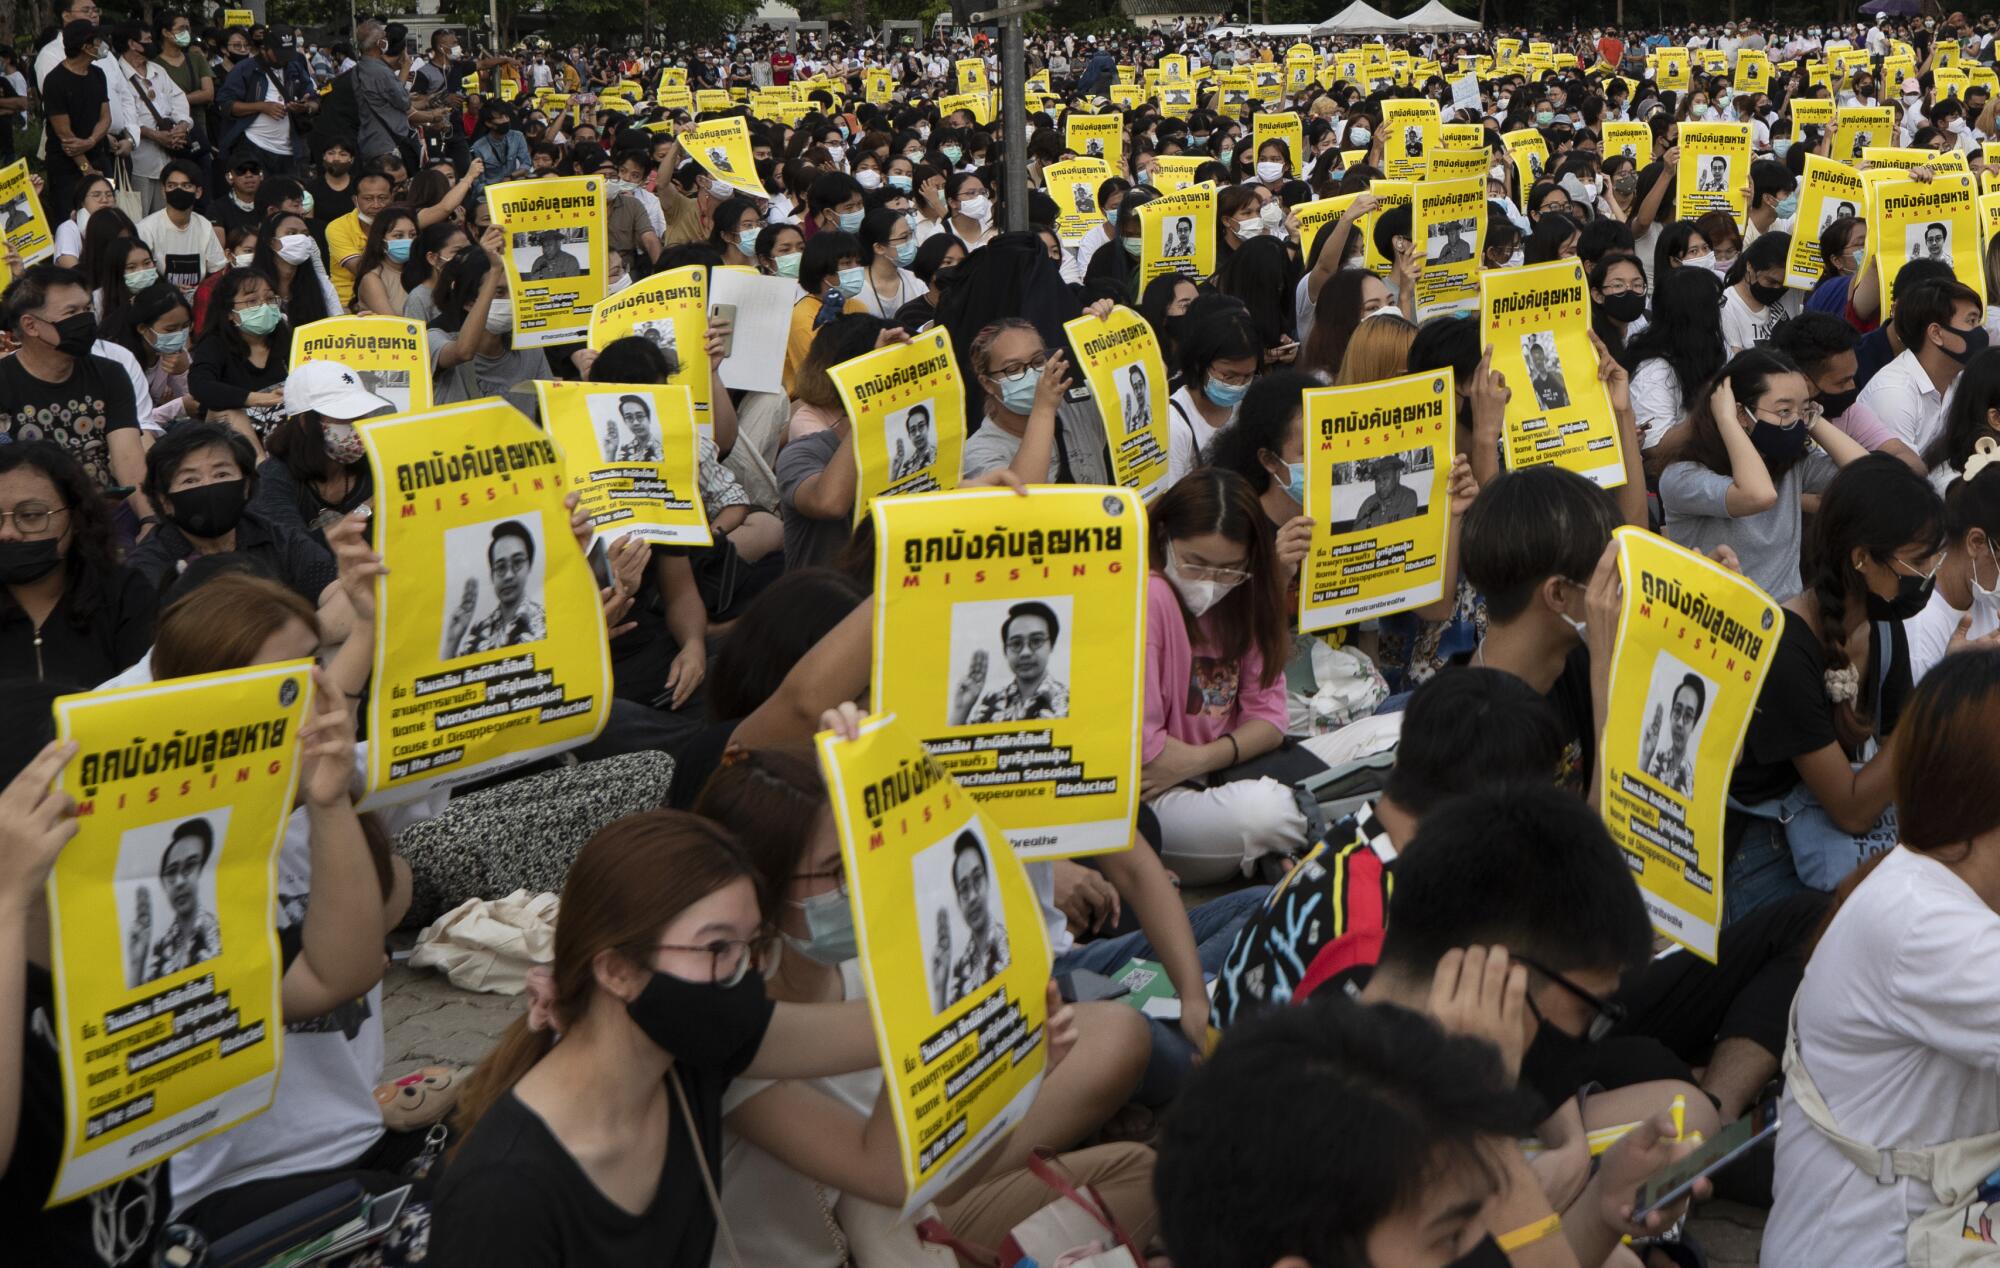 Pro-democracy students hold posters of Wanchalearm Satsaksit during a protest in Bangkok